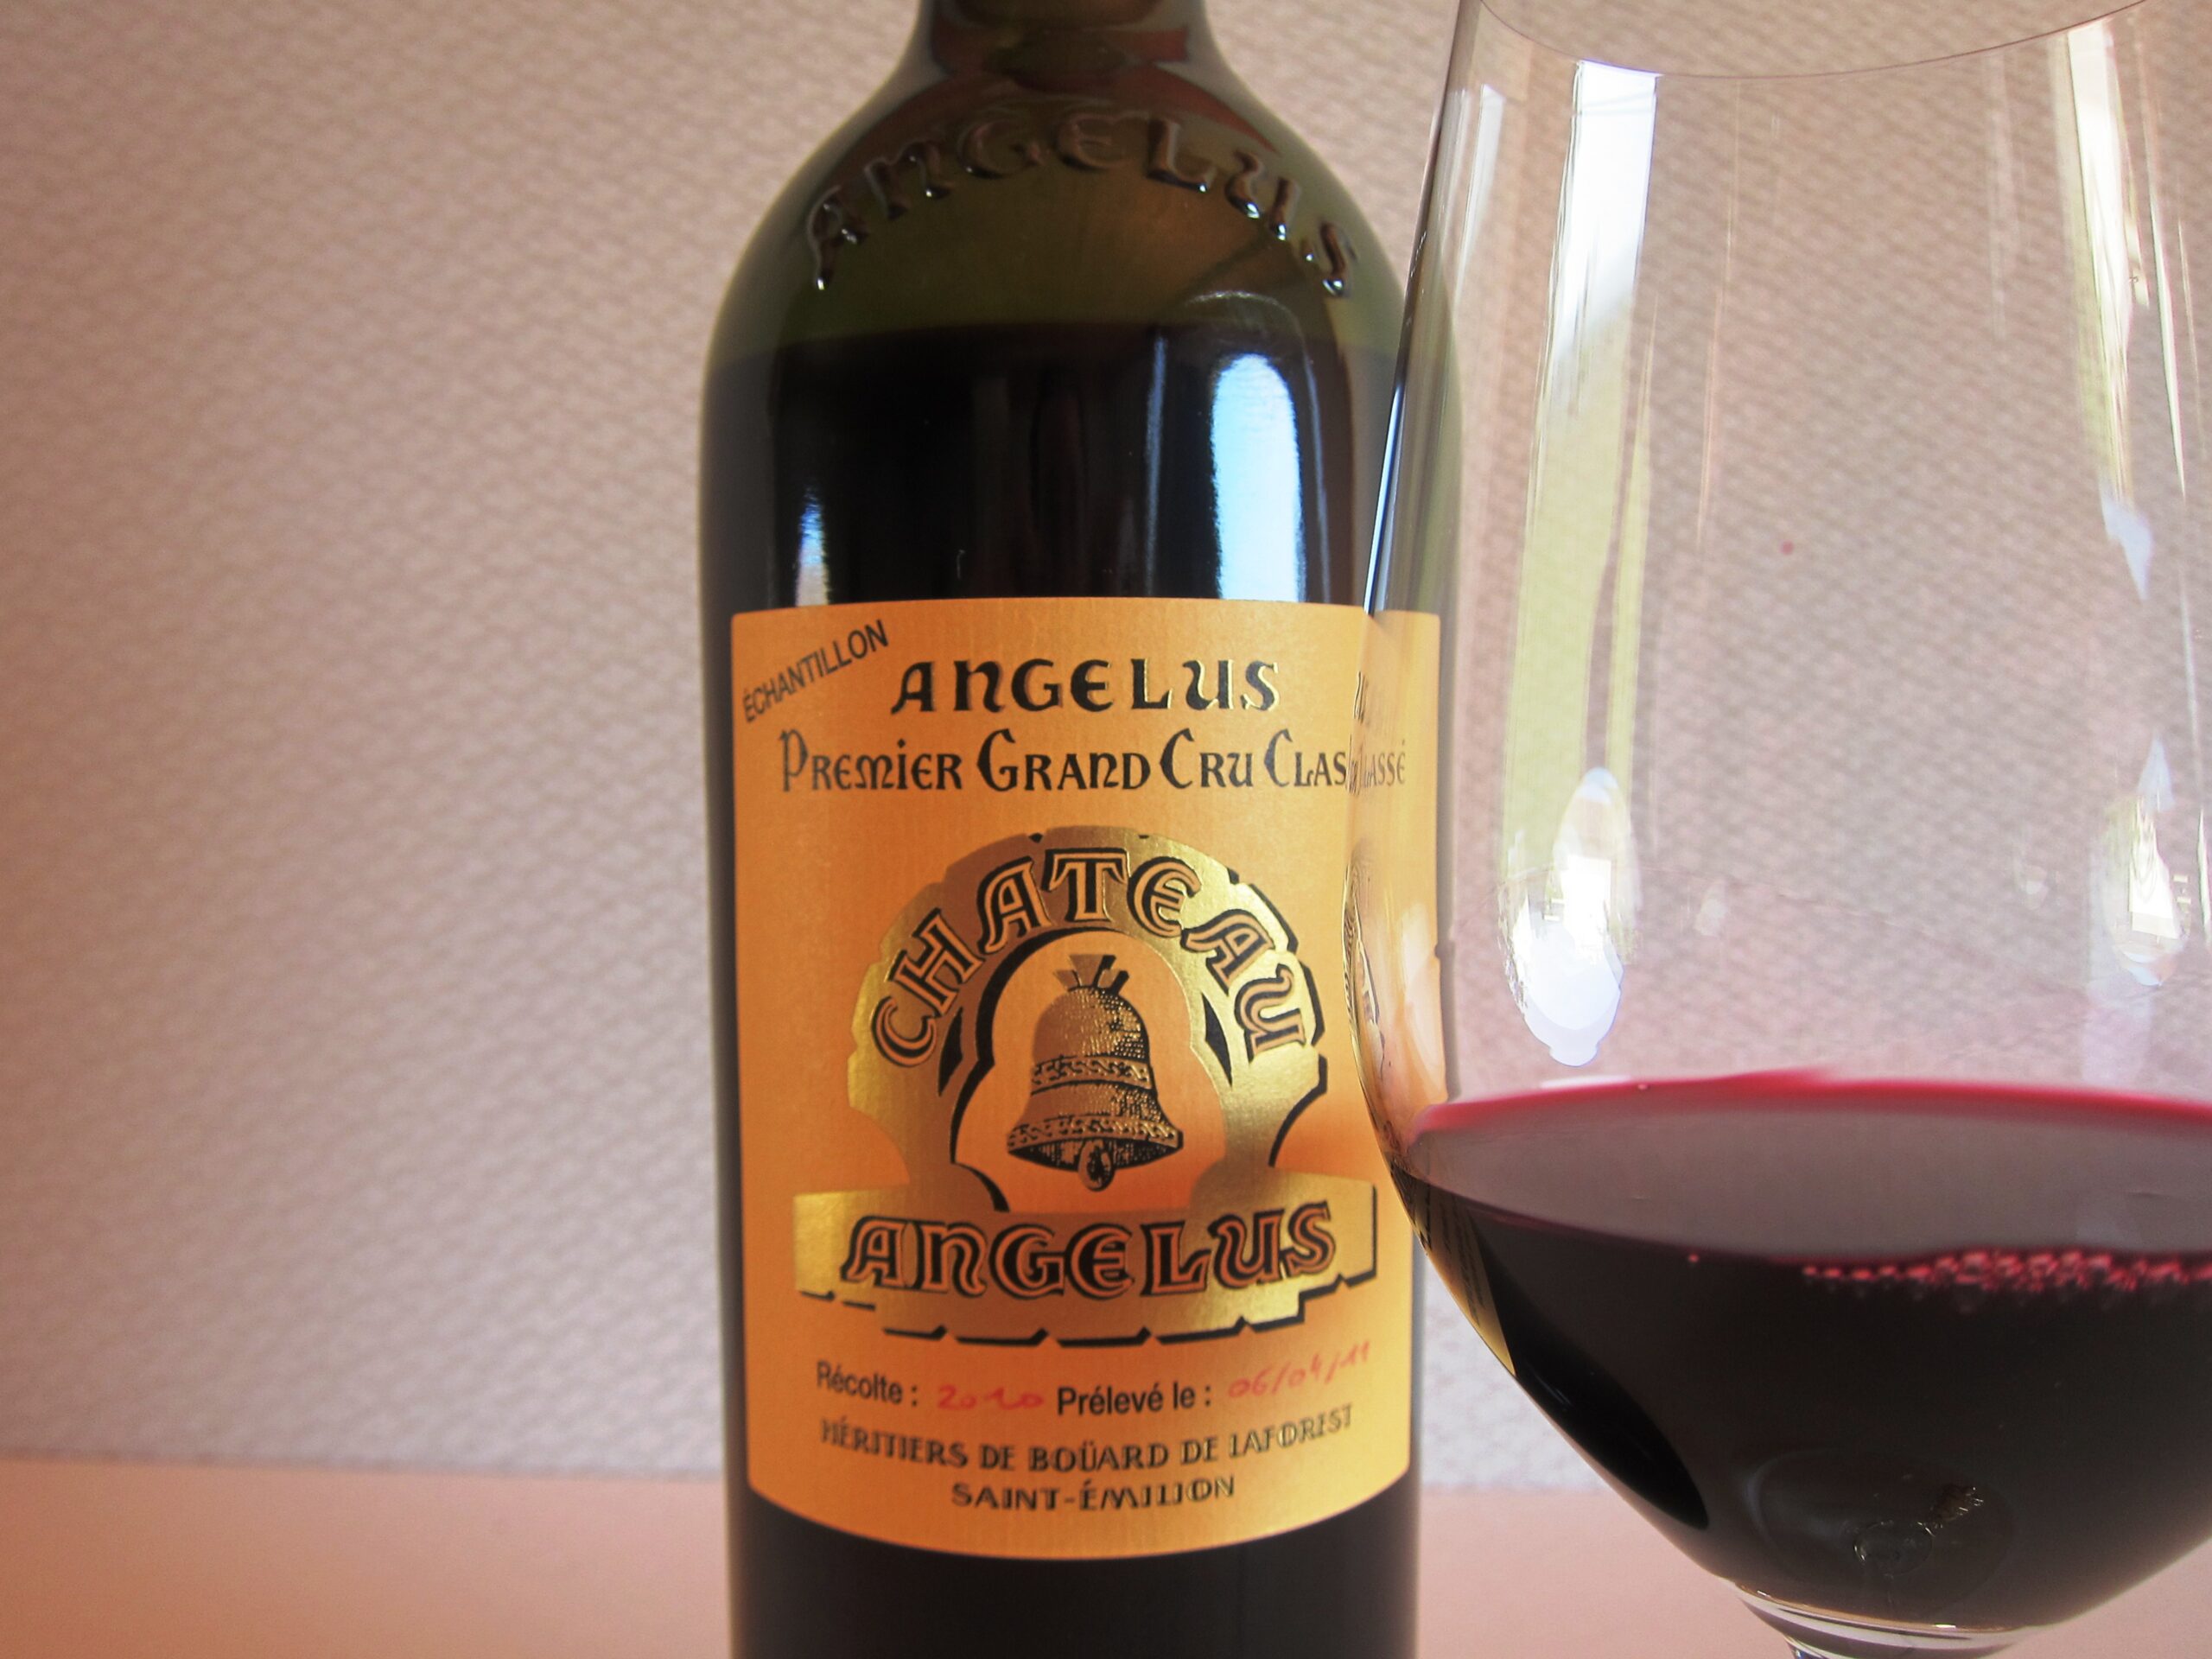 2010 Angelus Tasting Notes show Cashmere Tannins, Intensity